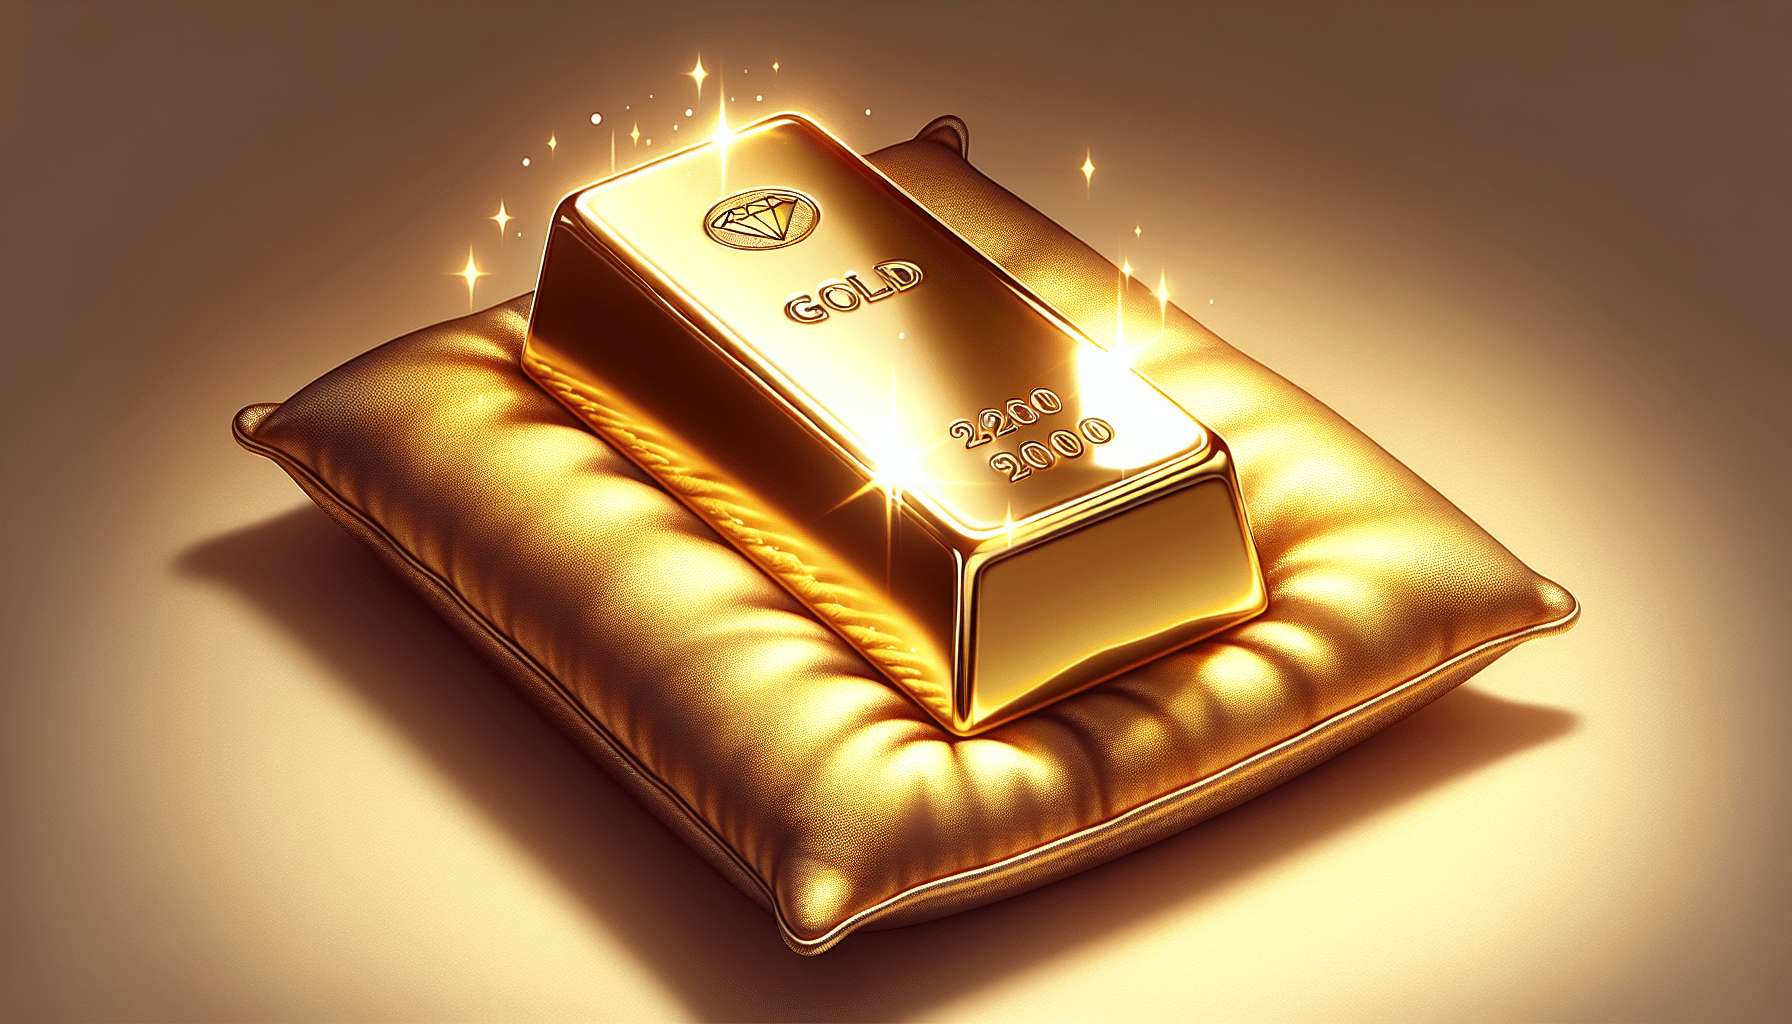 What Is The Current Price Of Gold For Public Bank Gold Investment?